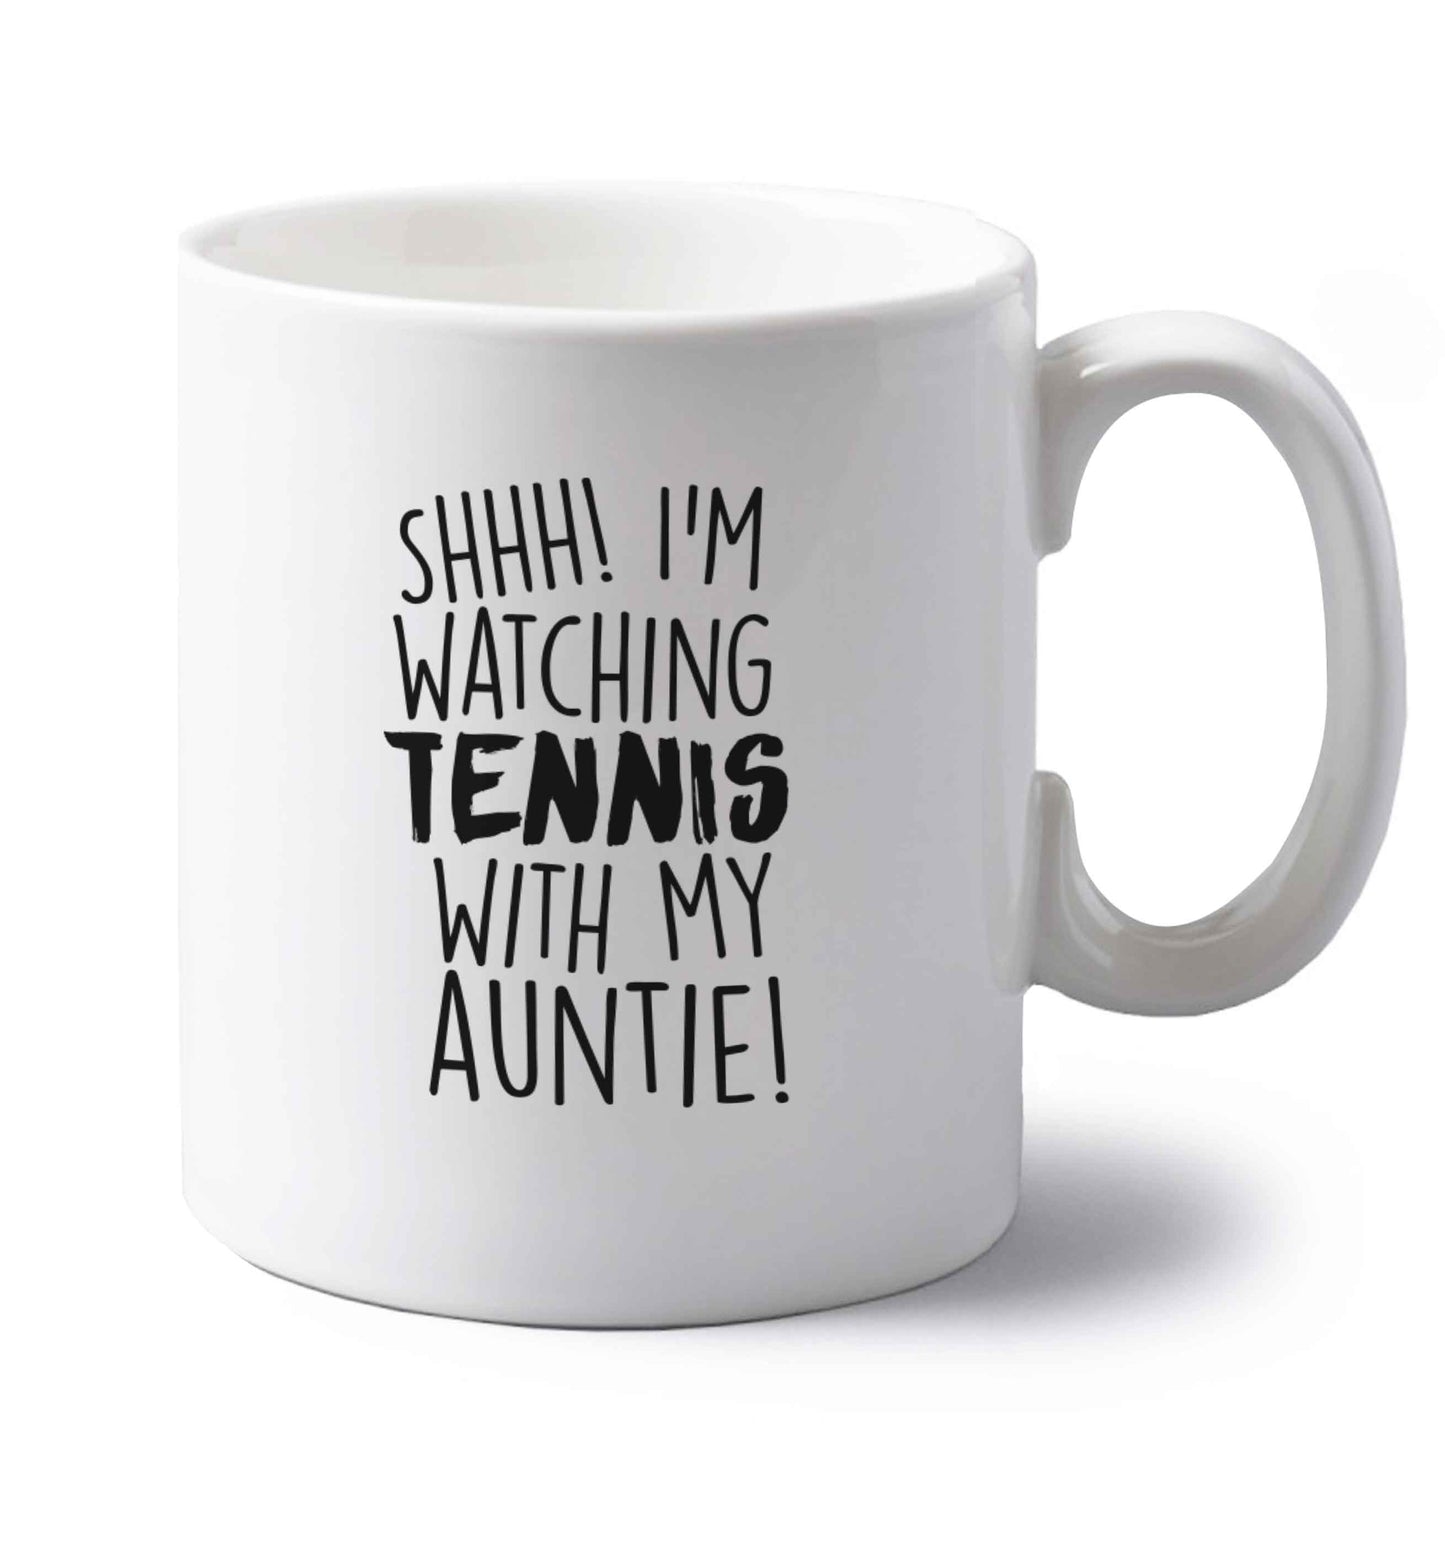 Shh! I'm watching tennis with my auntie! left handed white ceramic mug 